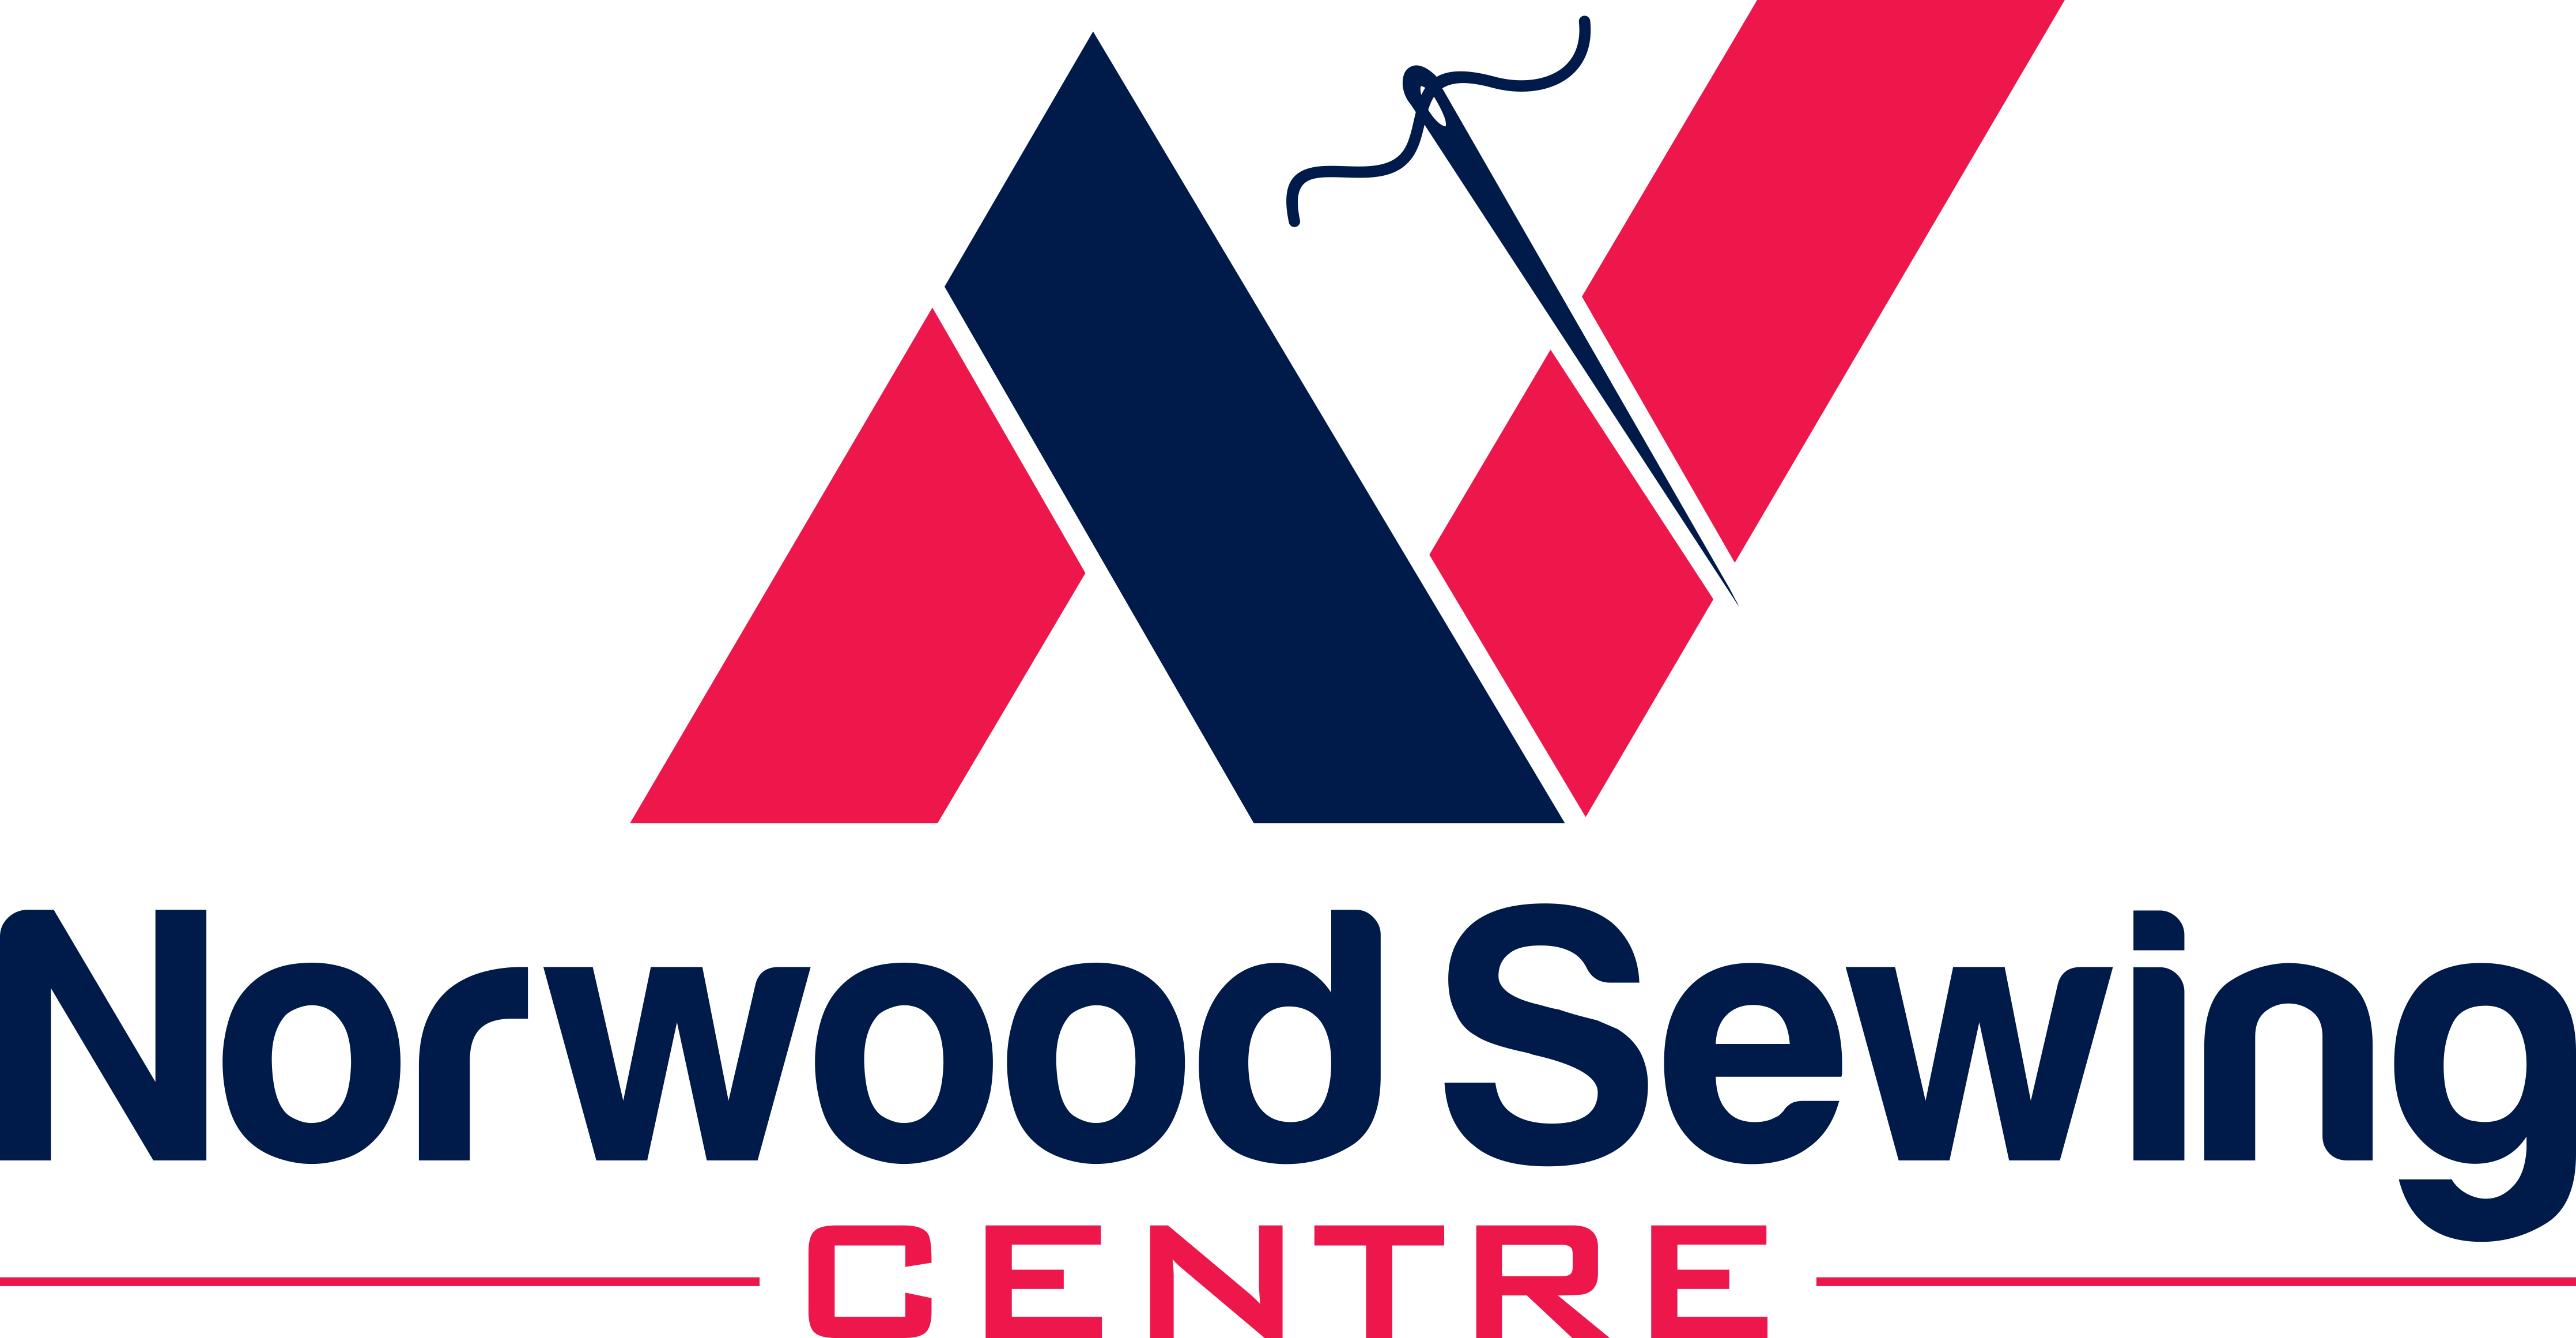 Norwood Sewing Centre